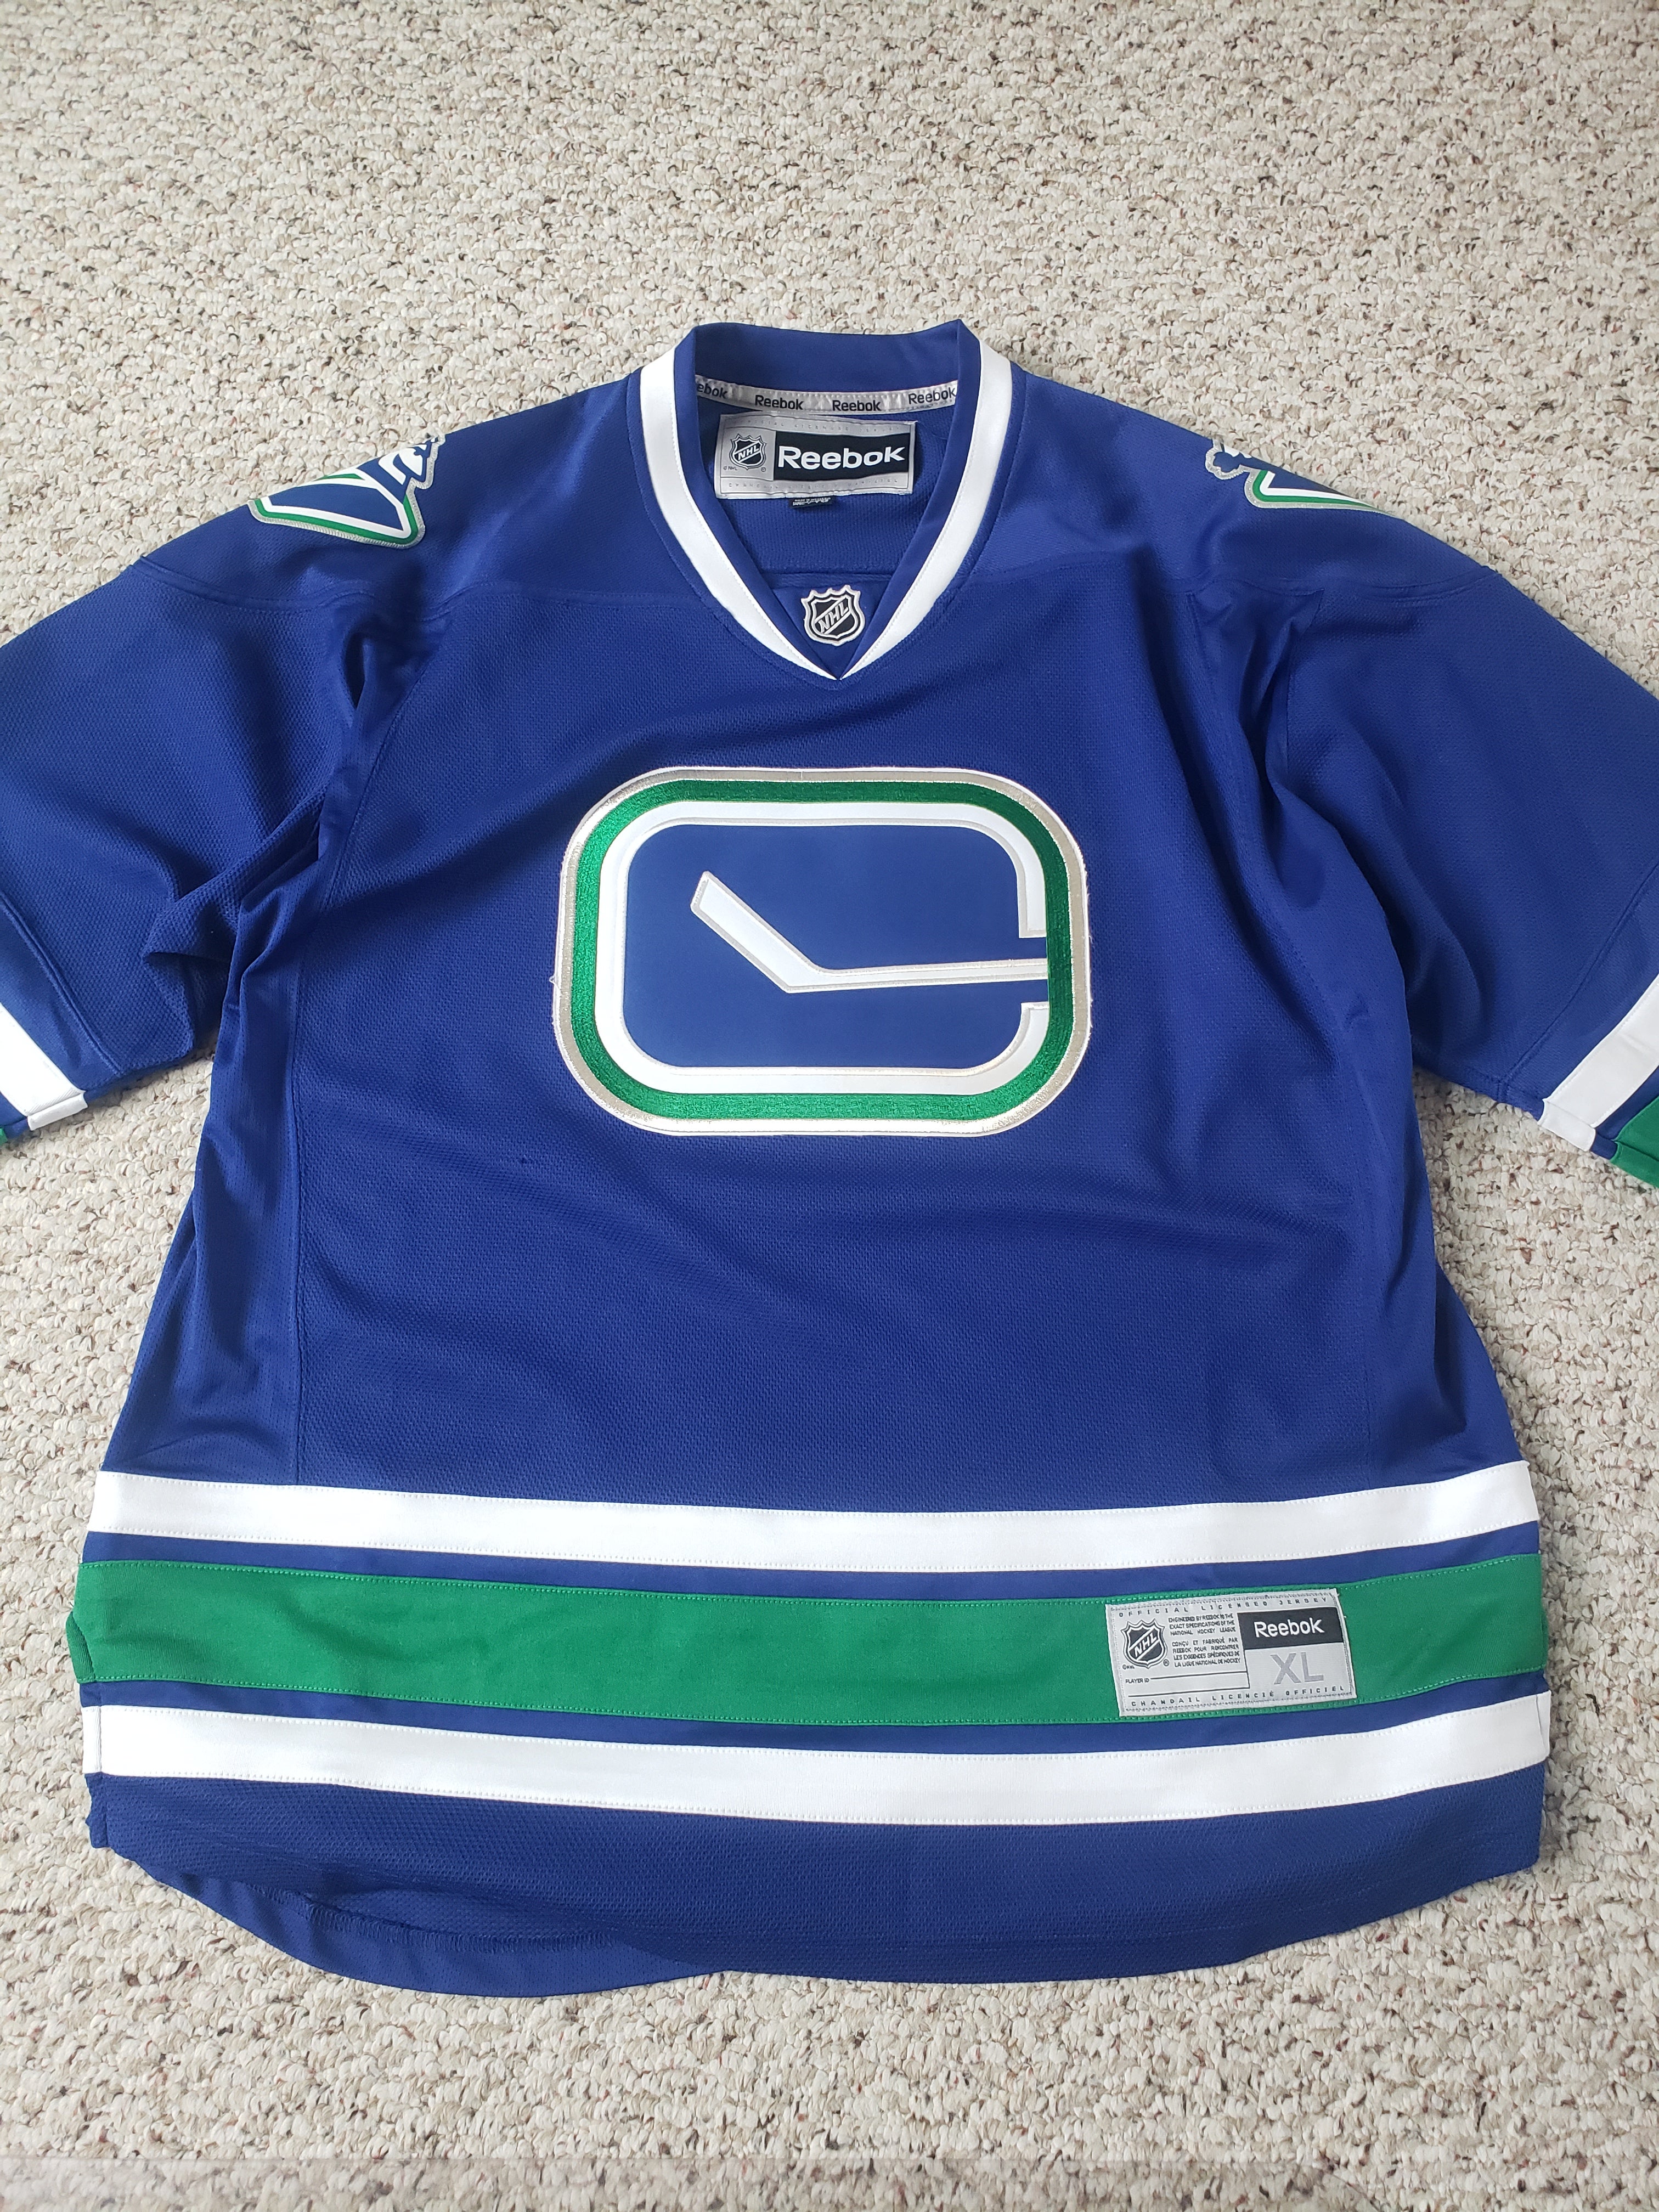 New With Tags Vancouver Canucks Men's Fanatics Jersey #6 Boeser